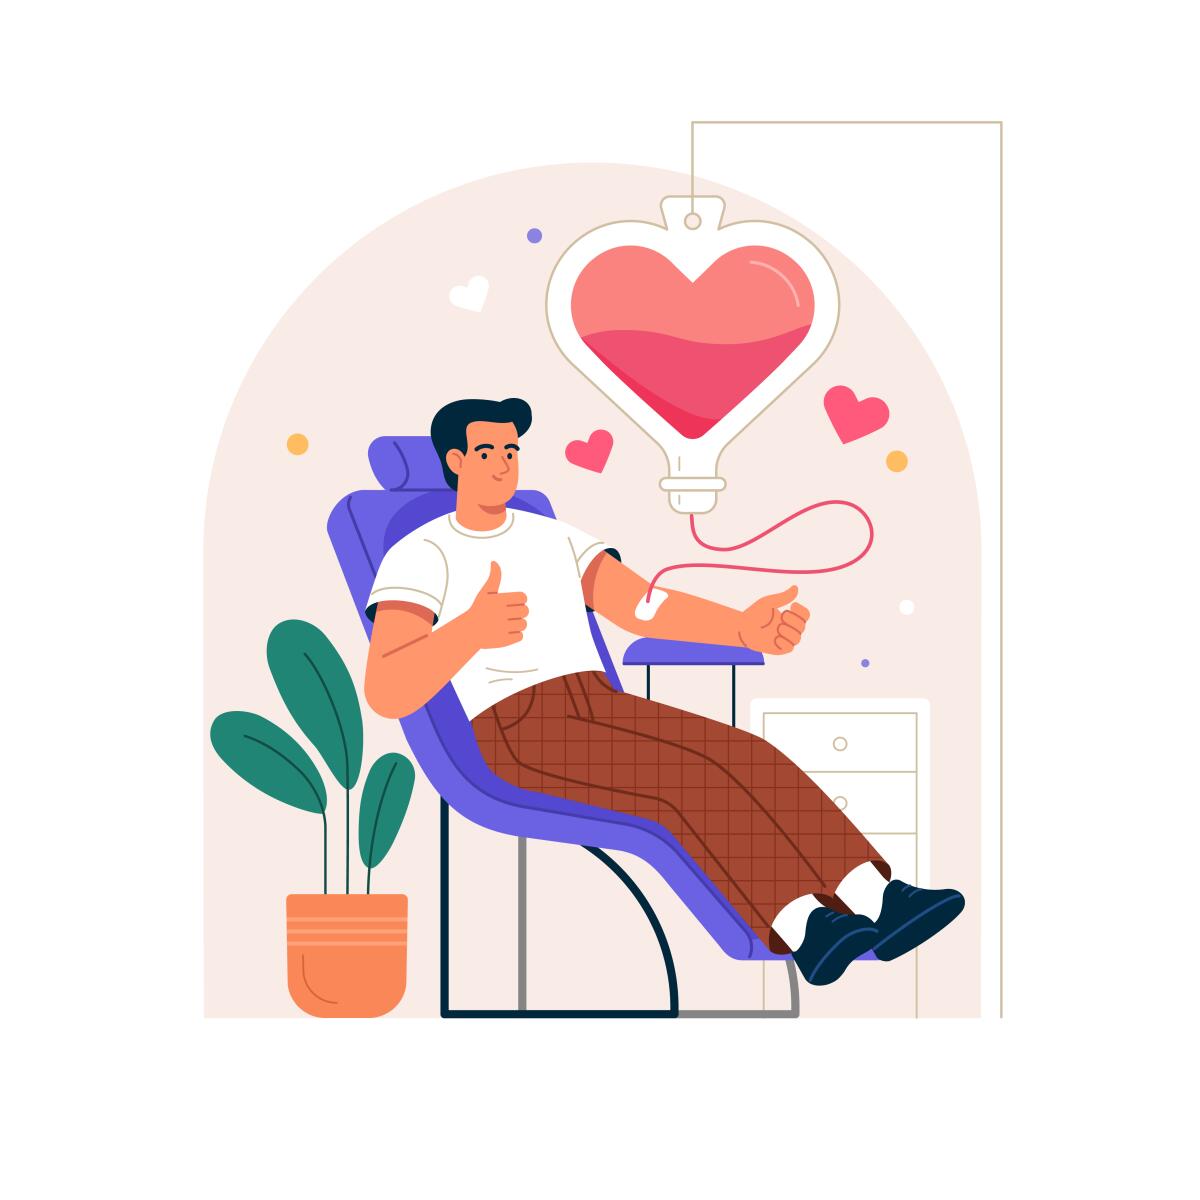 Vector illustration in flat cartoon style of a young smiling man in a chair donating his blood into a heart-shaped container.